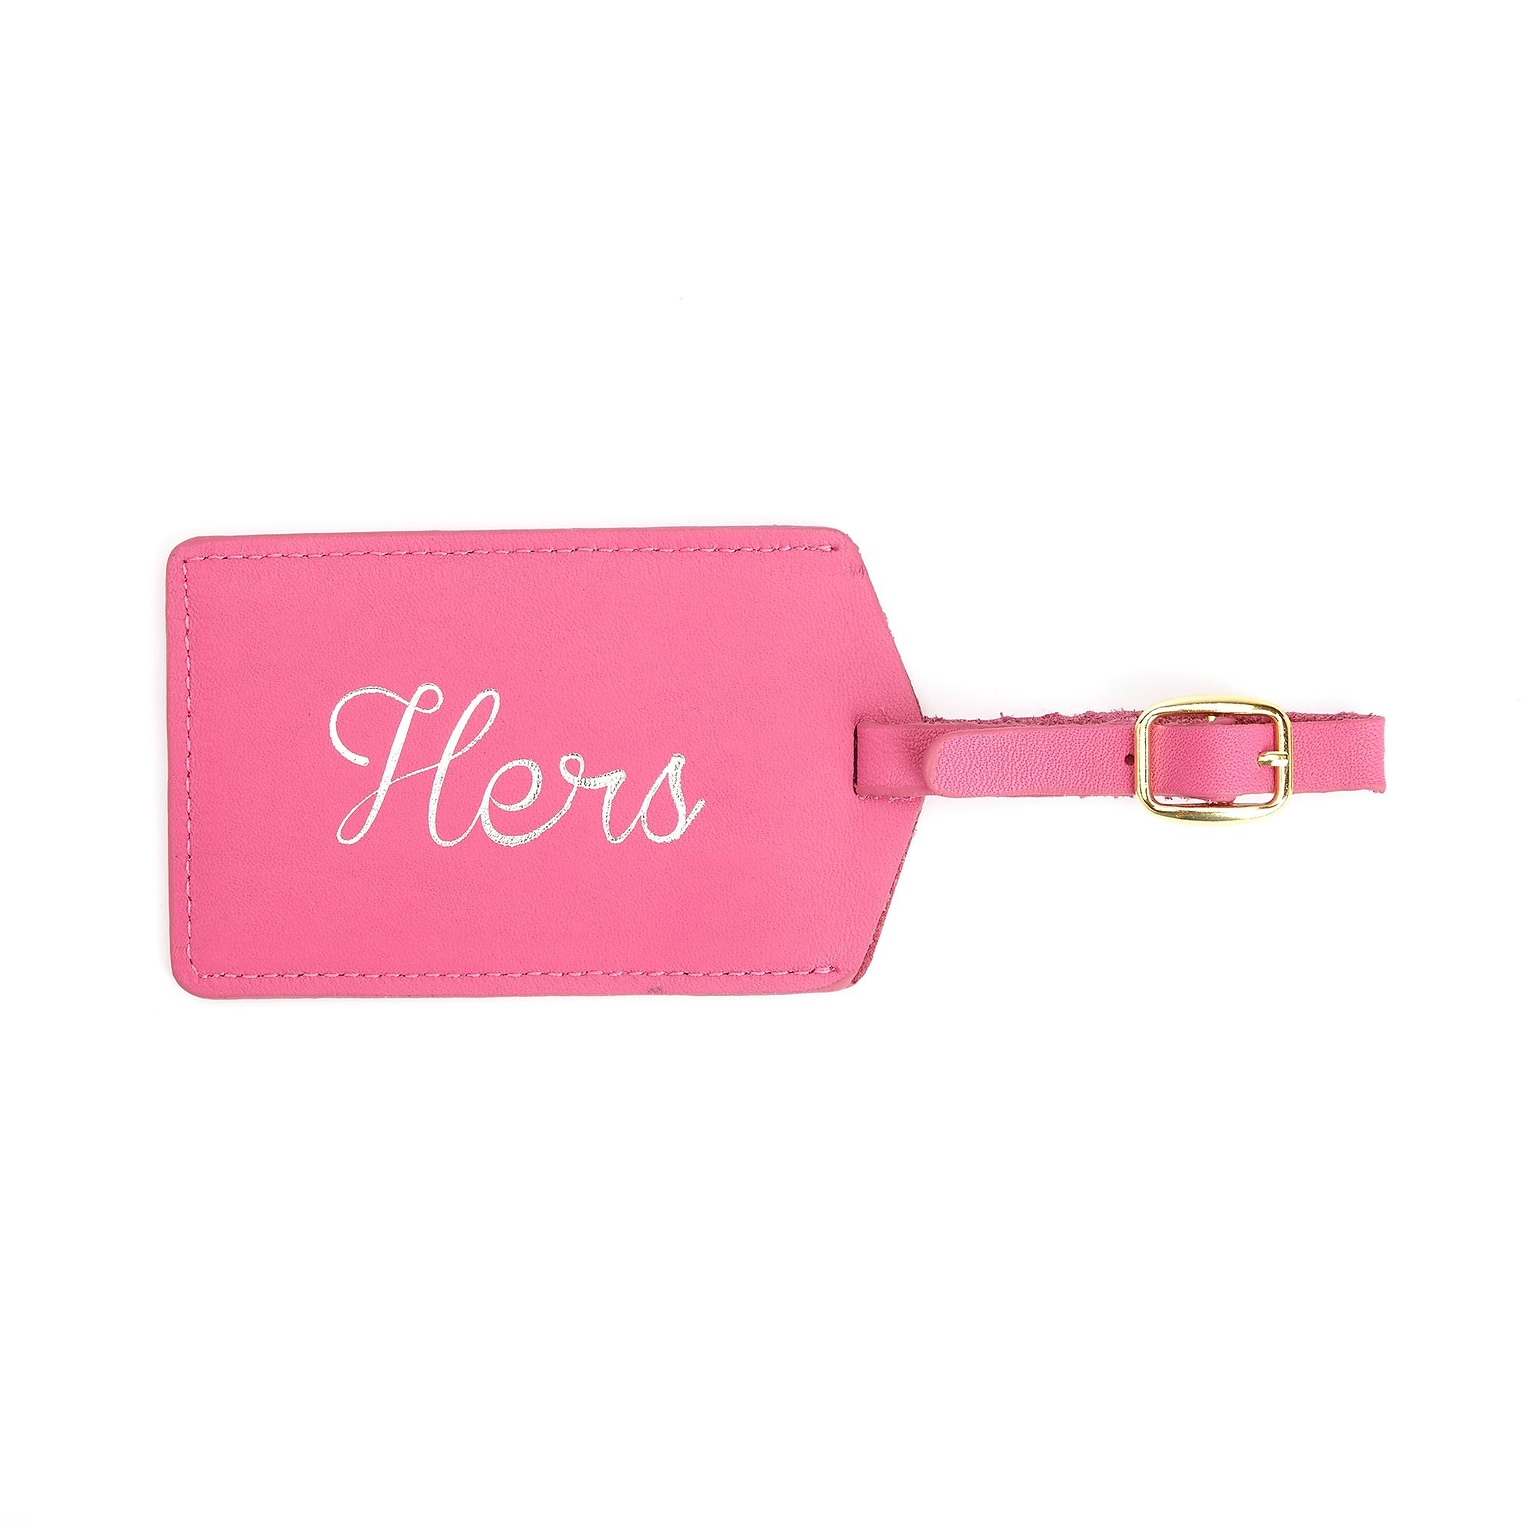 Royce Leather Luxury Luggage Hang Tag ID Hers(956-HERS-WB)